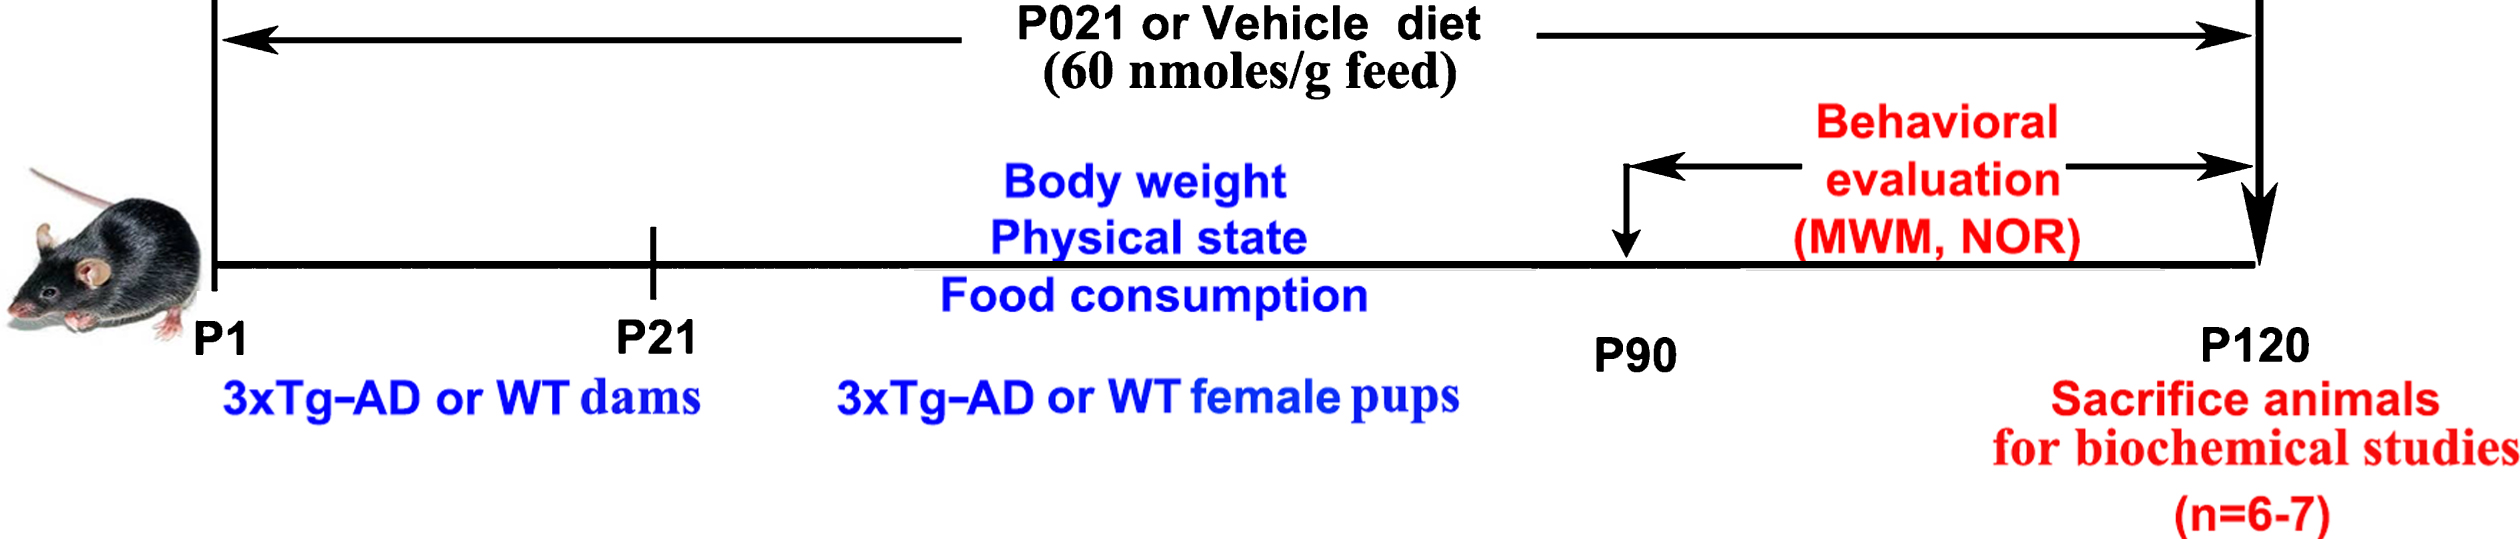 The design of the study. 3×Tg-AD and WT pregnant mice were treated with P021- or vehicle-chow from the day of the delivery of the pups (postnatal day 1 pups) till the weaning of pups on postnatal day 21, at which time point the pups were separated from their mothers and pups of dams treated with P021 were kept on P021 and pups of dams treated with vehicle chow were kept on vehicle chow till they were sacrificed at the age of 120 days. Morris water maze (MWM) and Novel object recognition (NOR) tests were carried out consecutively from postnatal day 90 onwards. The animals were sacrificed at postnatal day 120 for biochemical analysis. P1, postnatal day 1; WT, wild type mice; P021, peptidergic neurotrophic compound P021 diet.